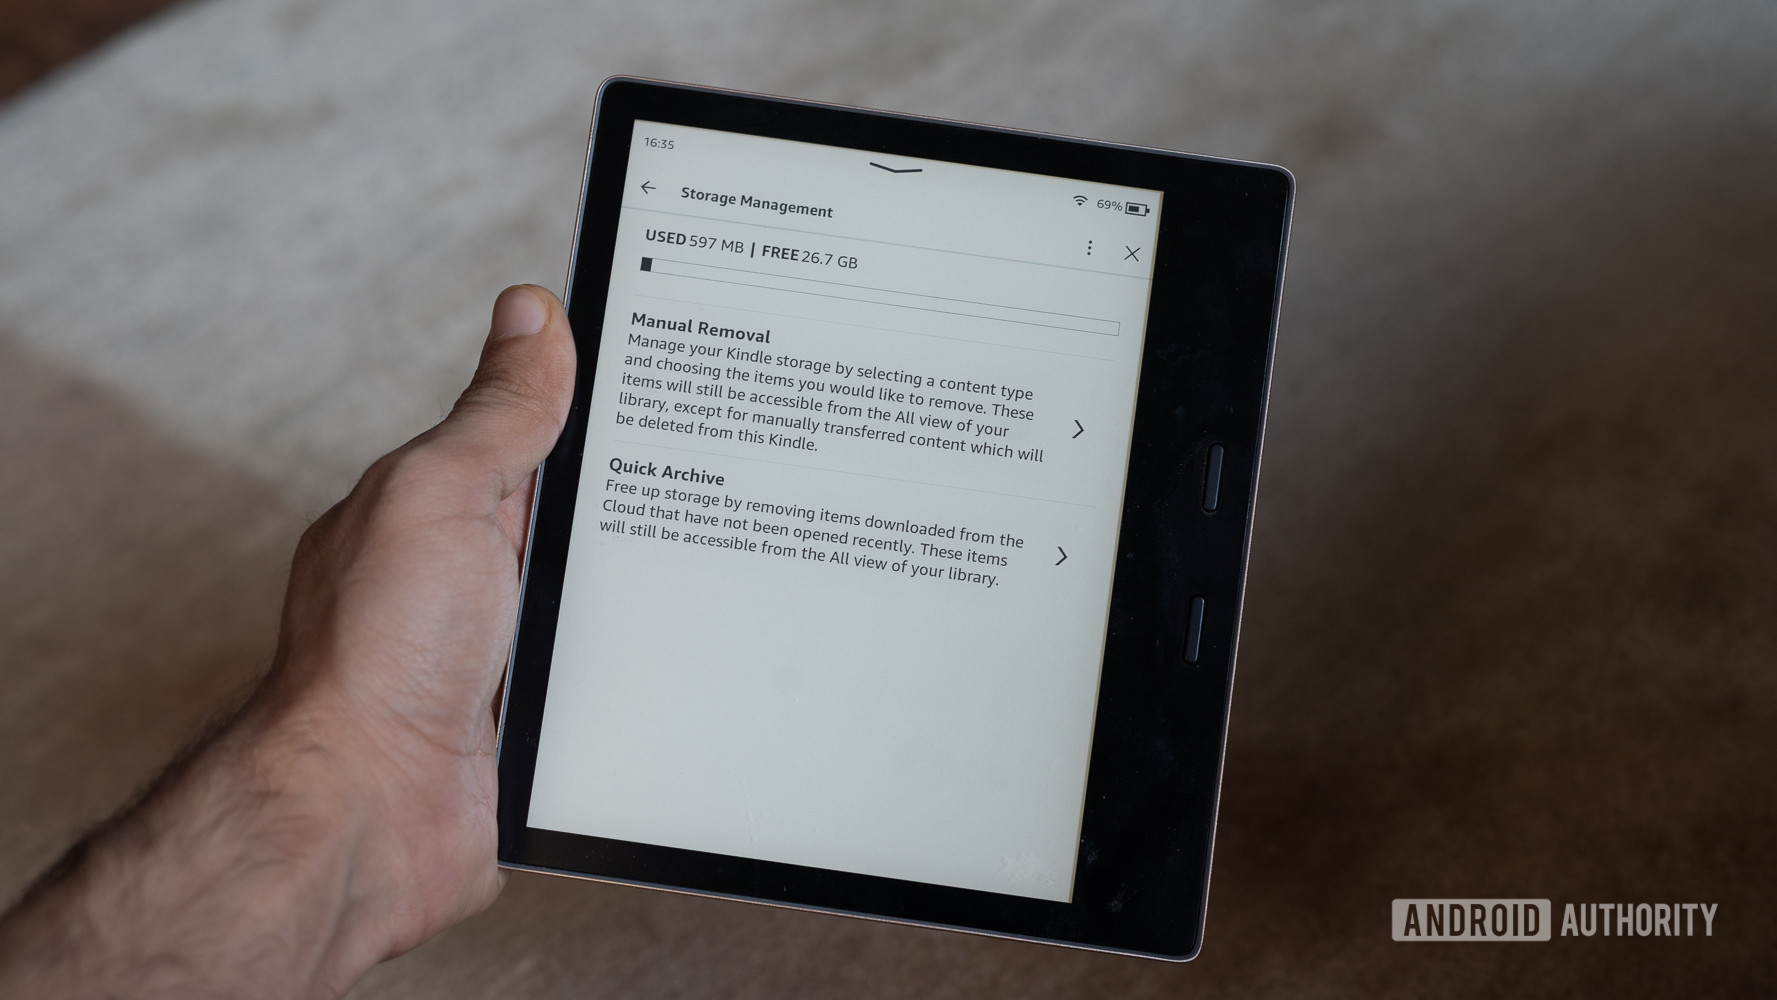 Amazon Kindle Tips quick archive to free storage